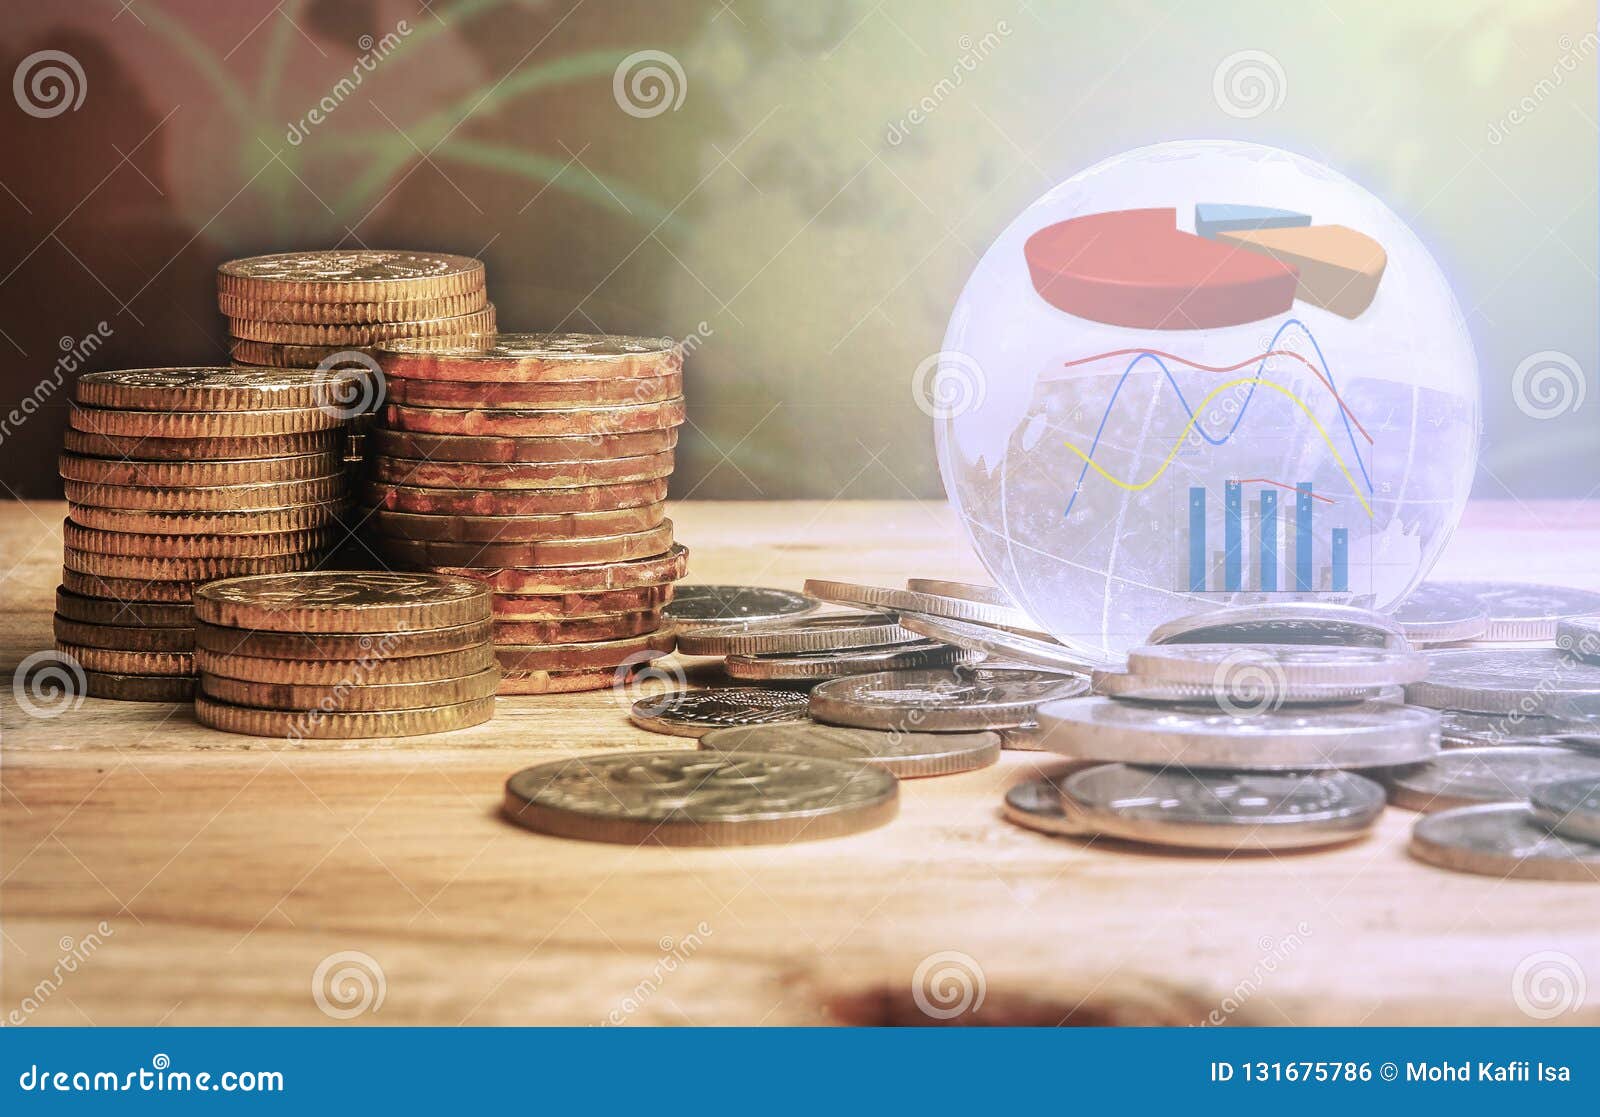 global financial concept. stack of coins and globe with graph icons over a blur map background. selective focus